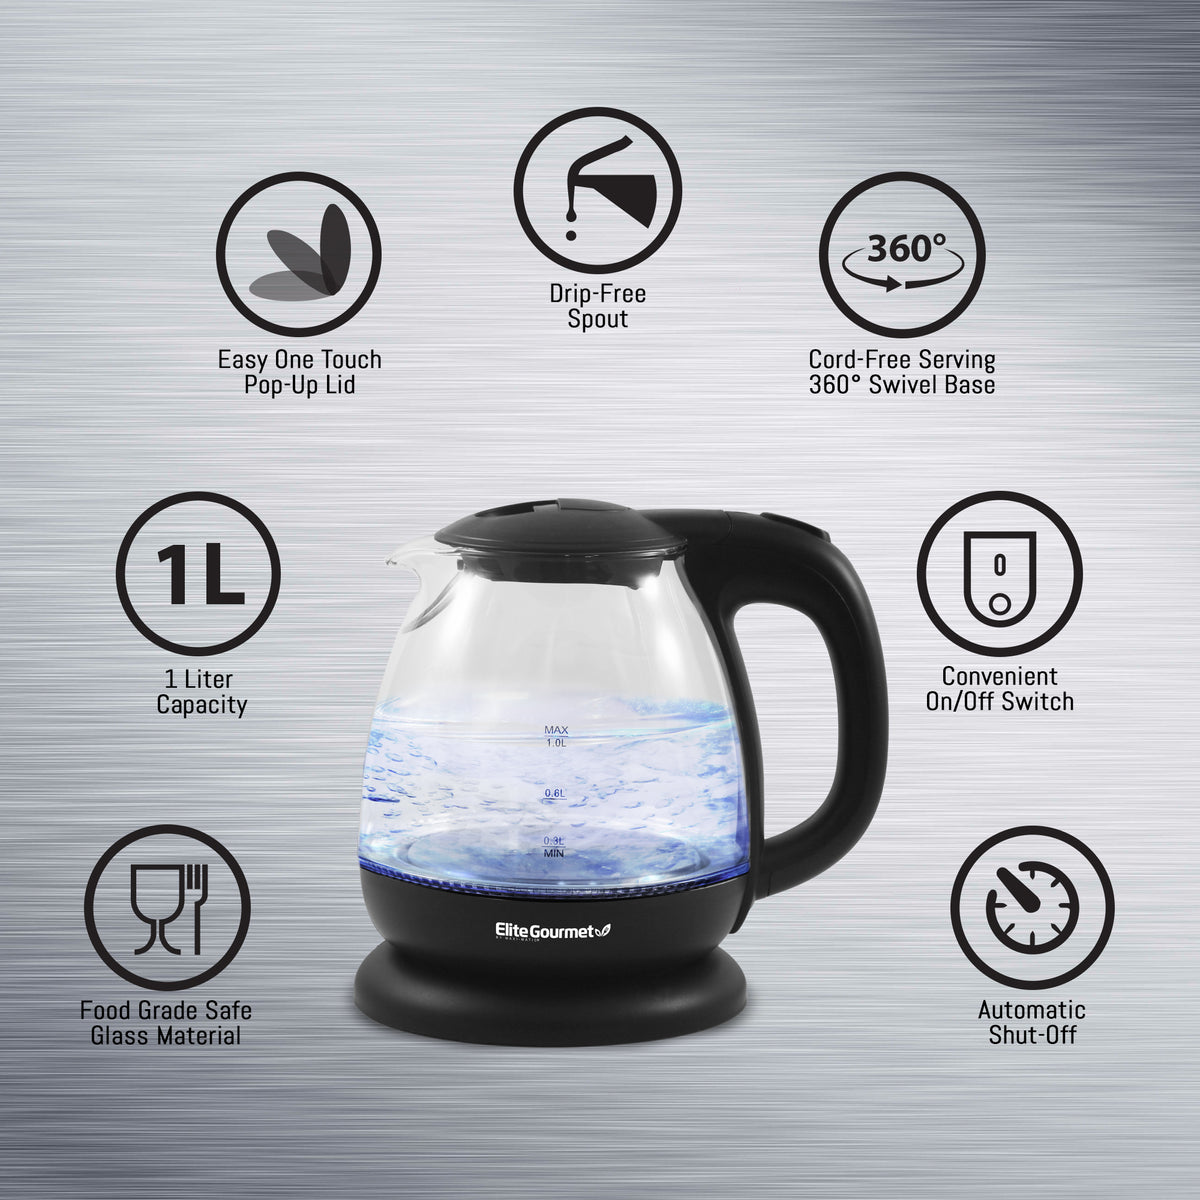 The Electric Kettles That Will Make Your Life So Much Easier